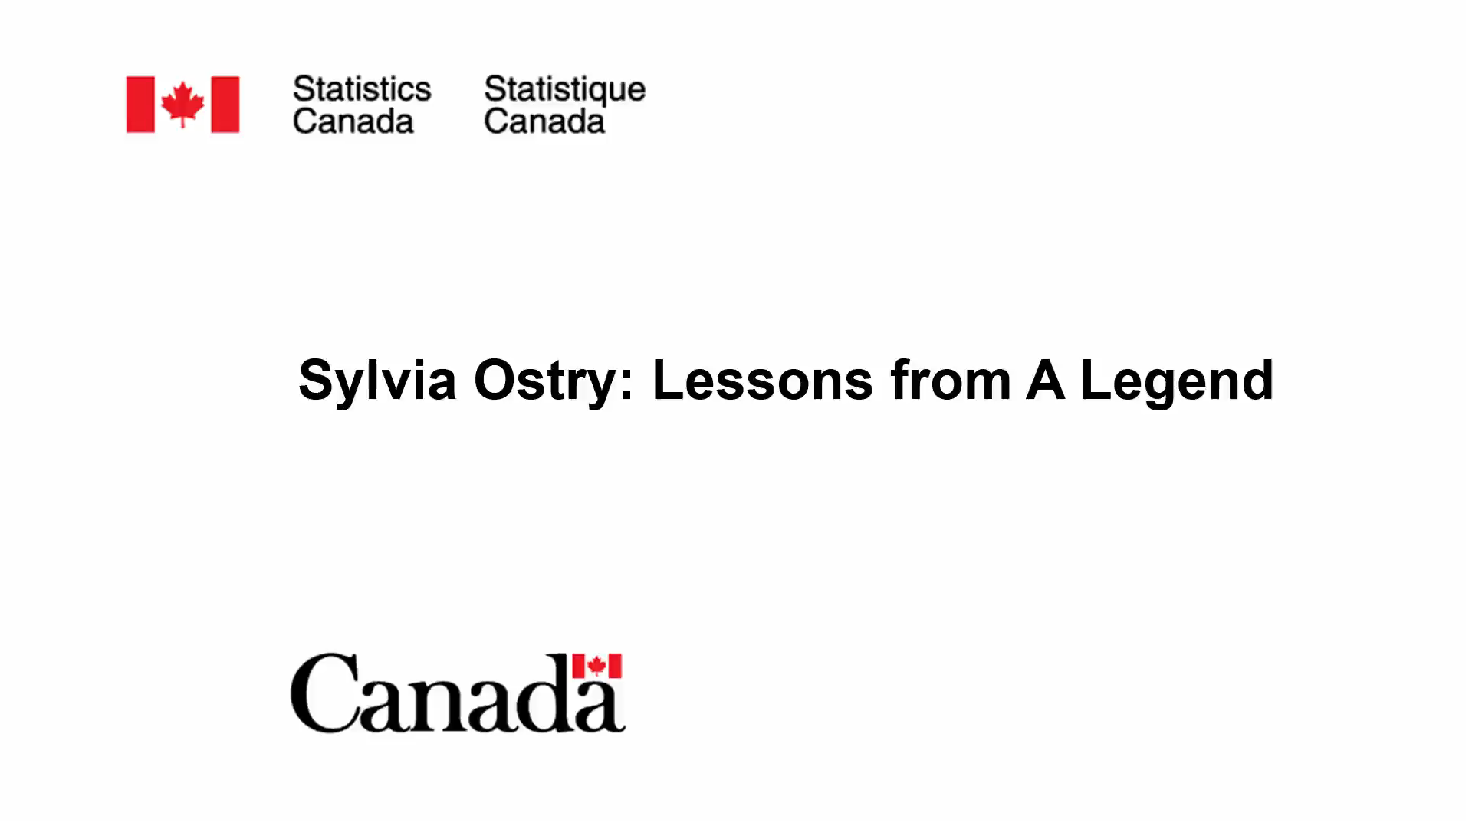 Sylvia Ostry: Lessons from A Legend